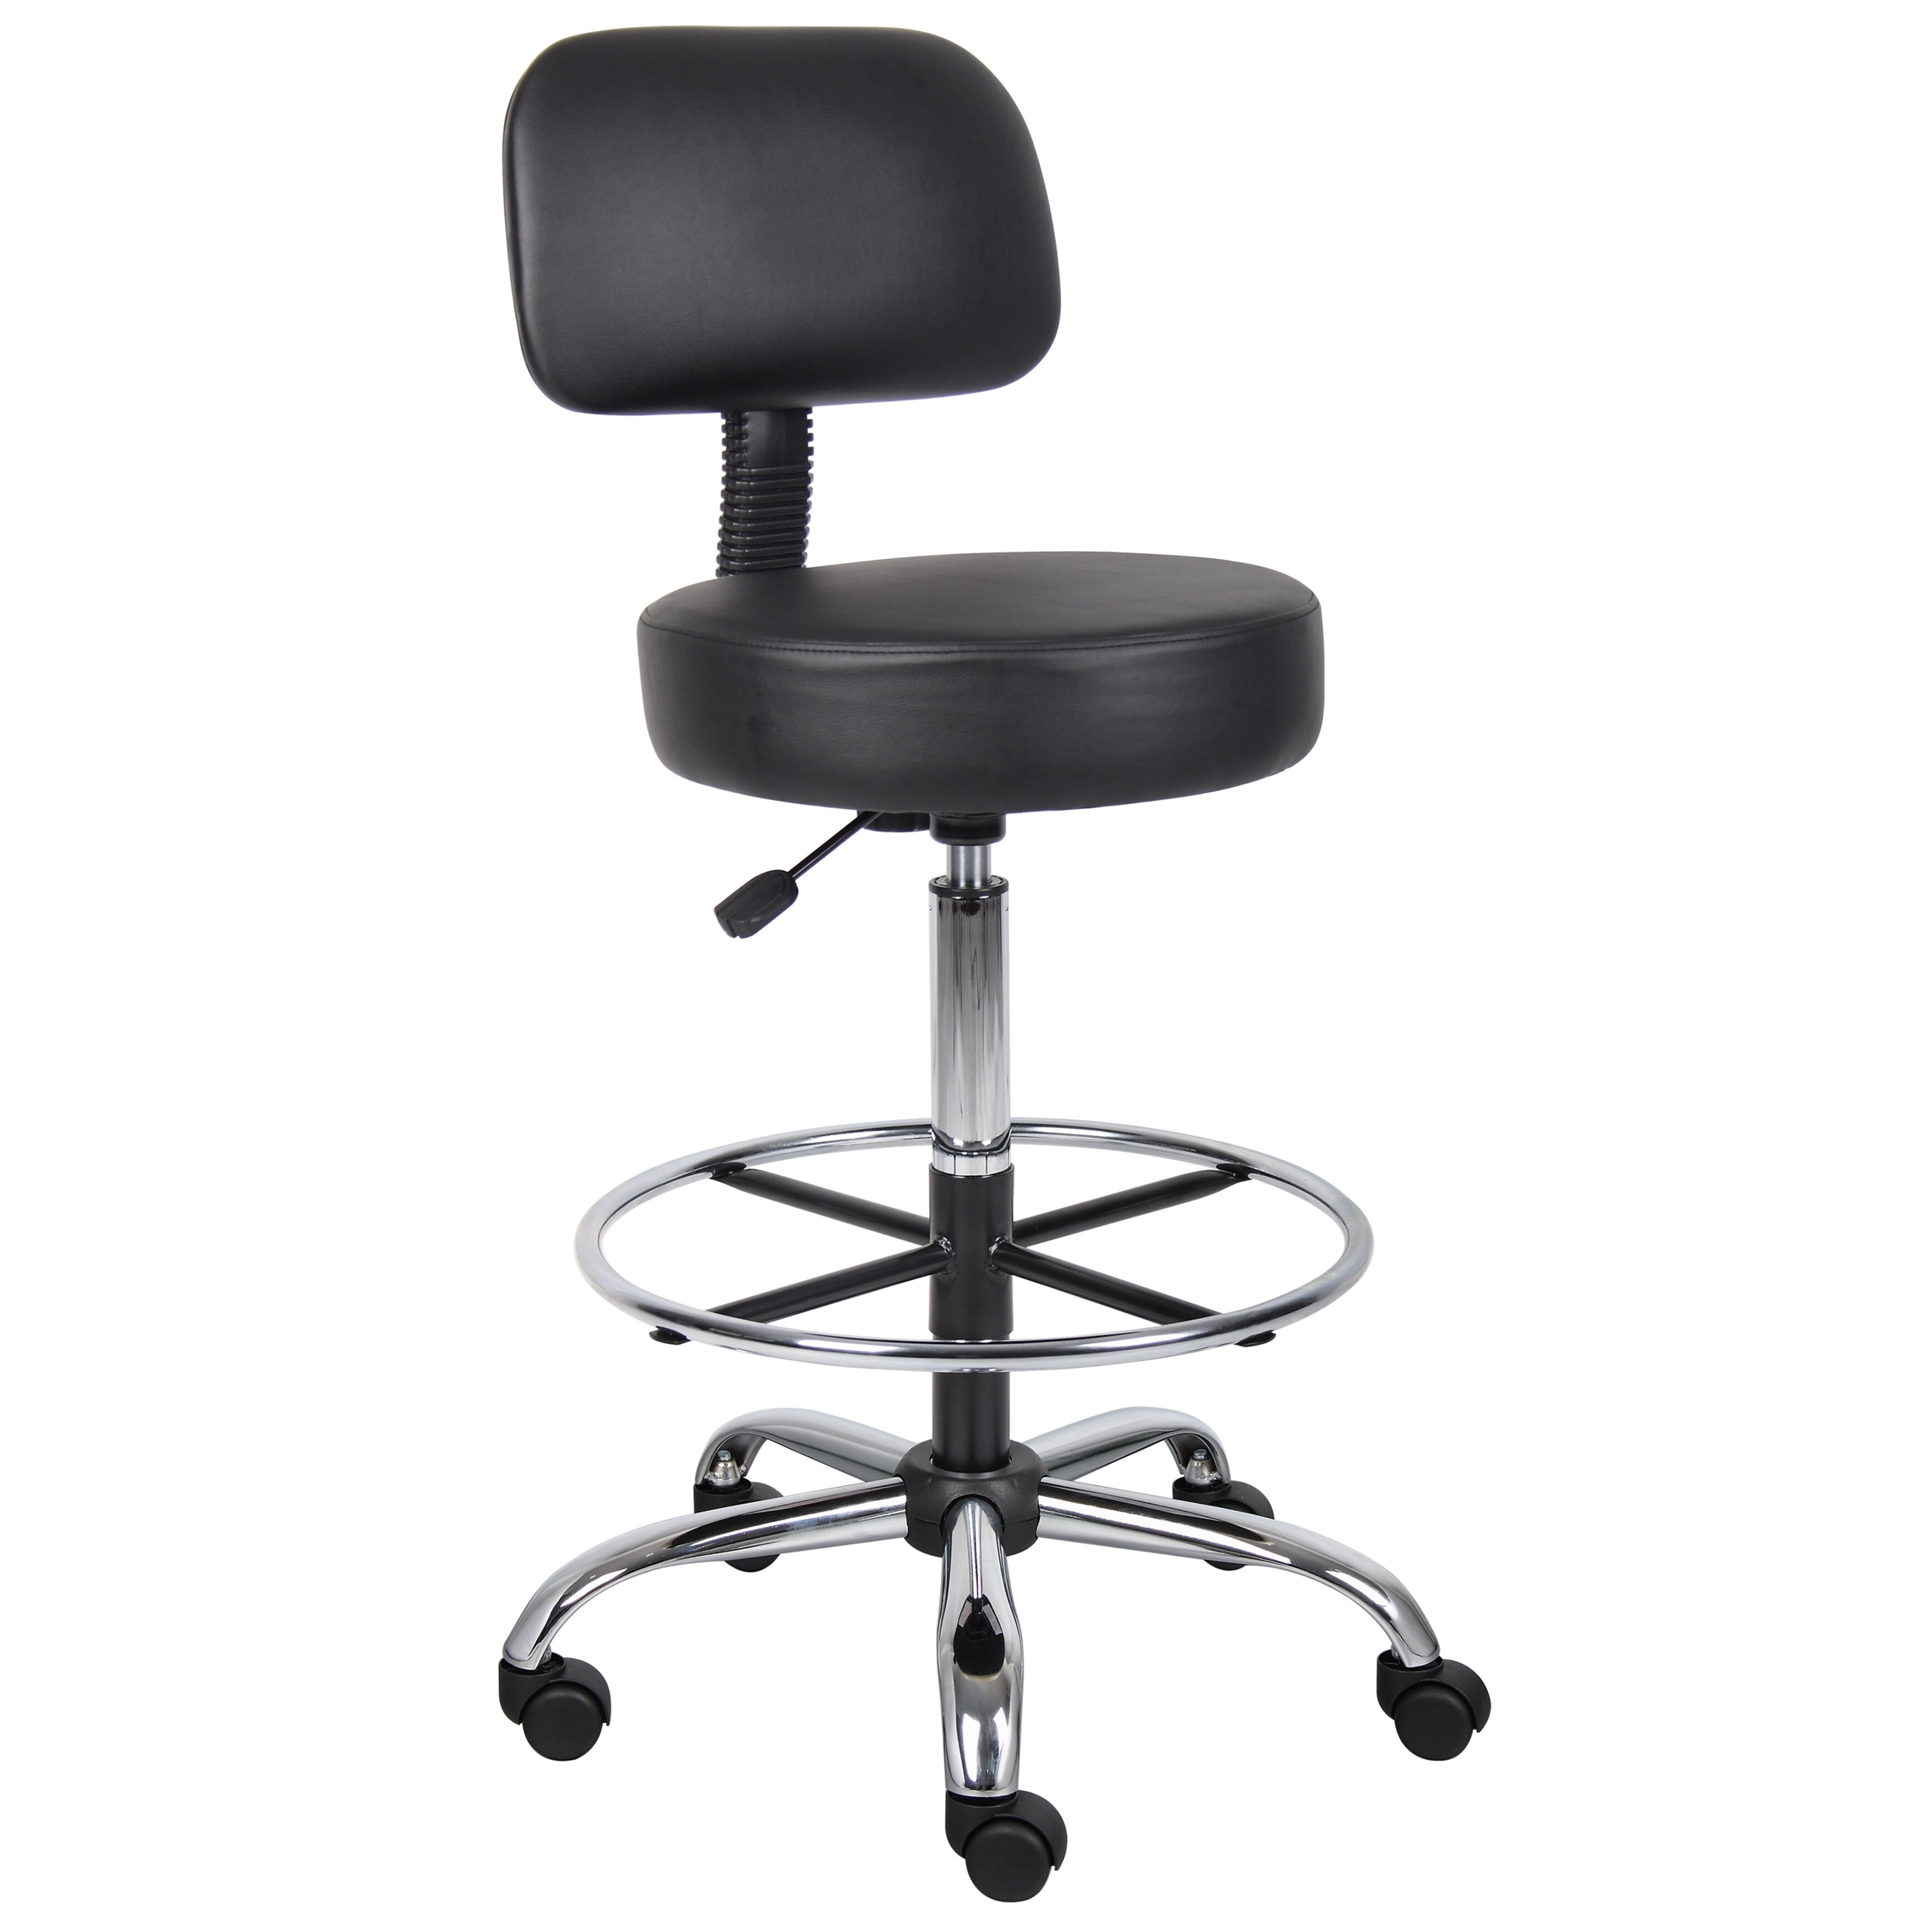 Boss caressoft drafting stool with back rest